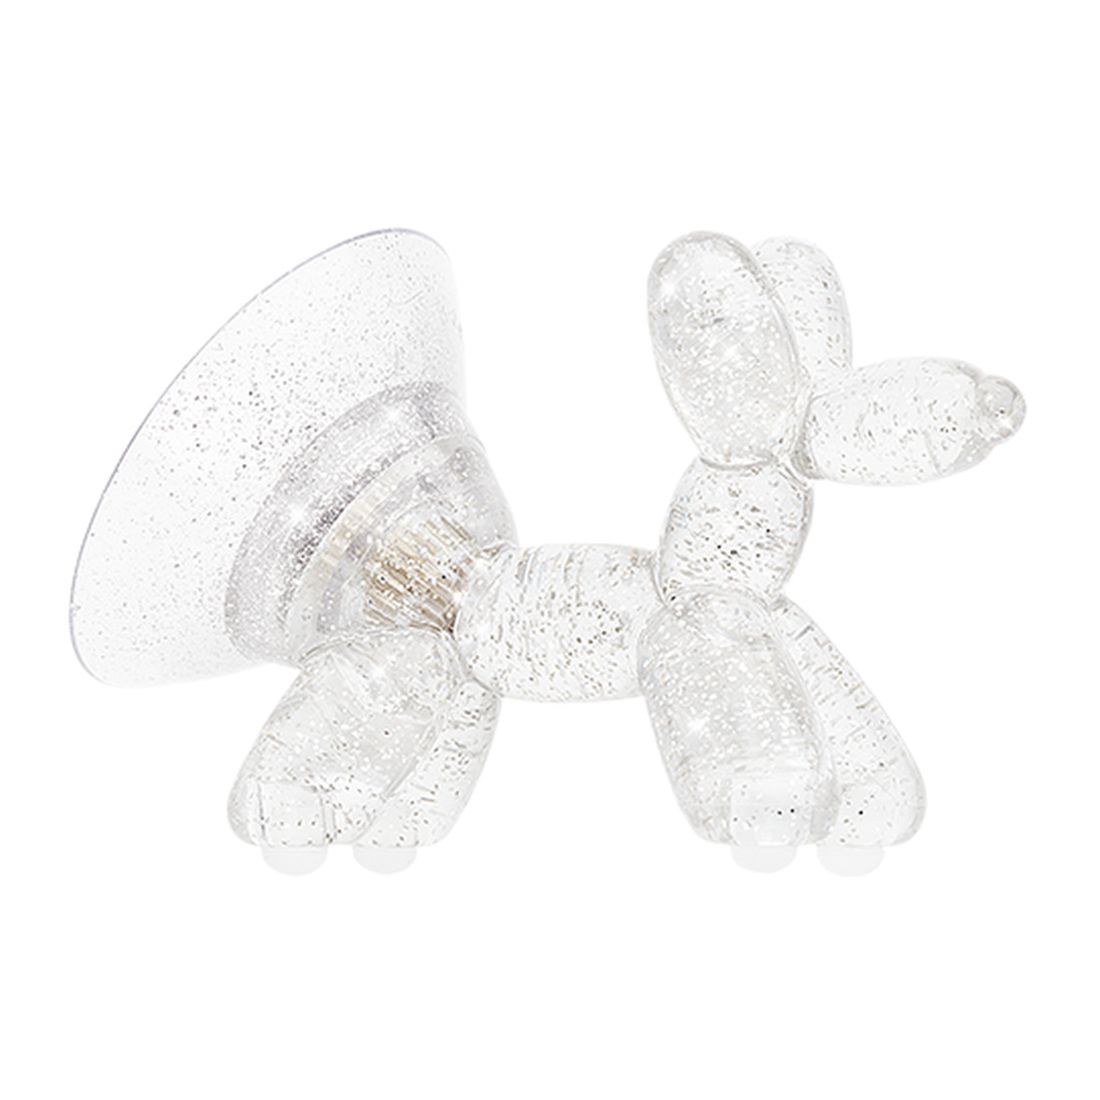 Case-Mate Balloon Dog Sheer Crystal Clear Stand Ups